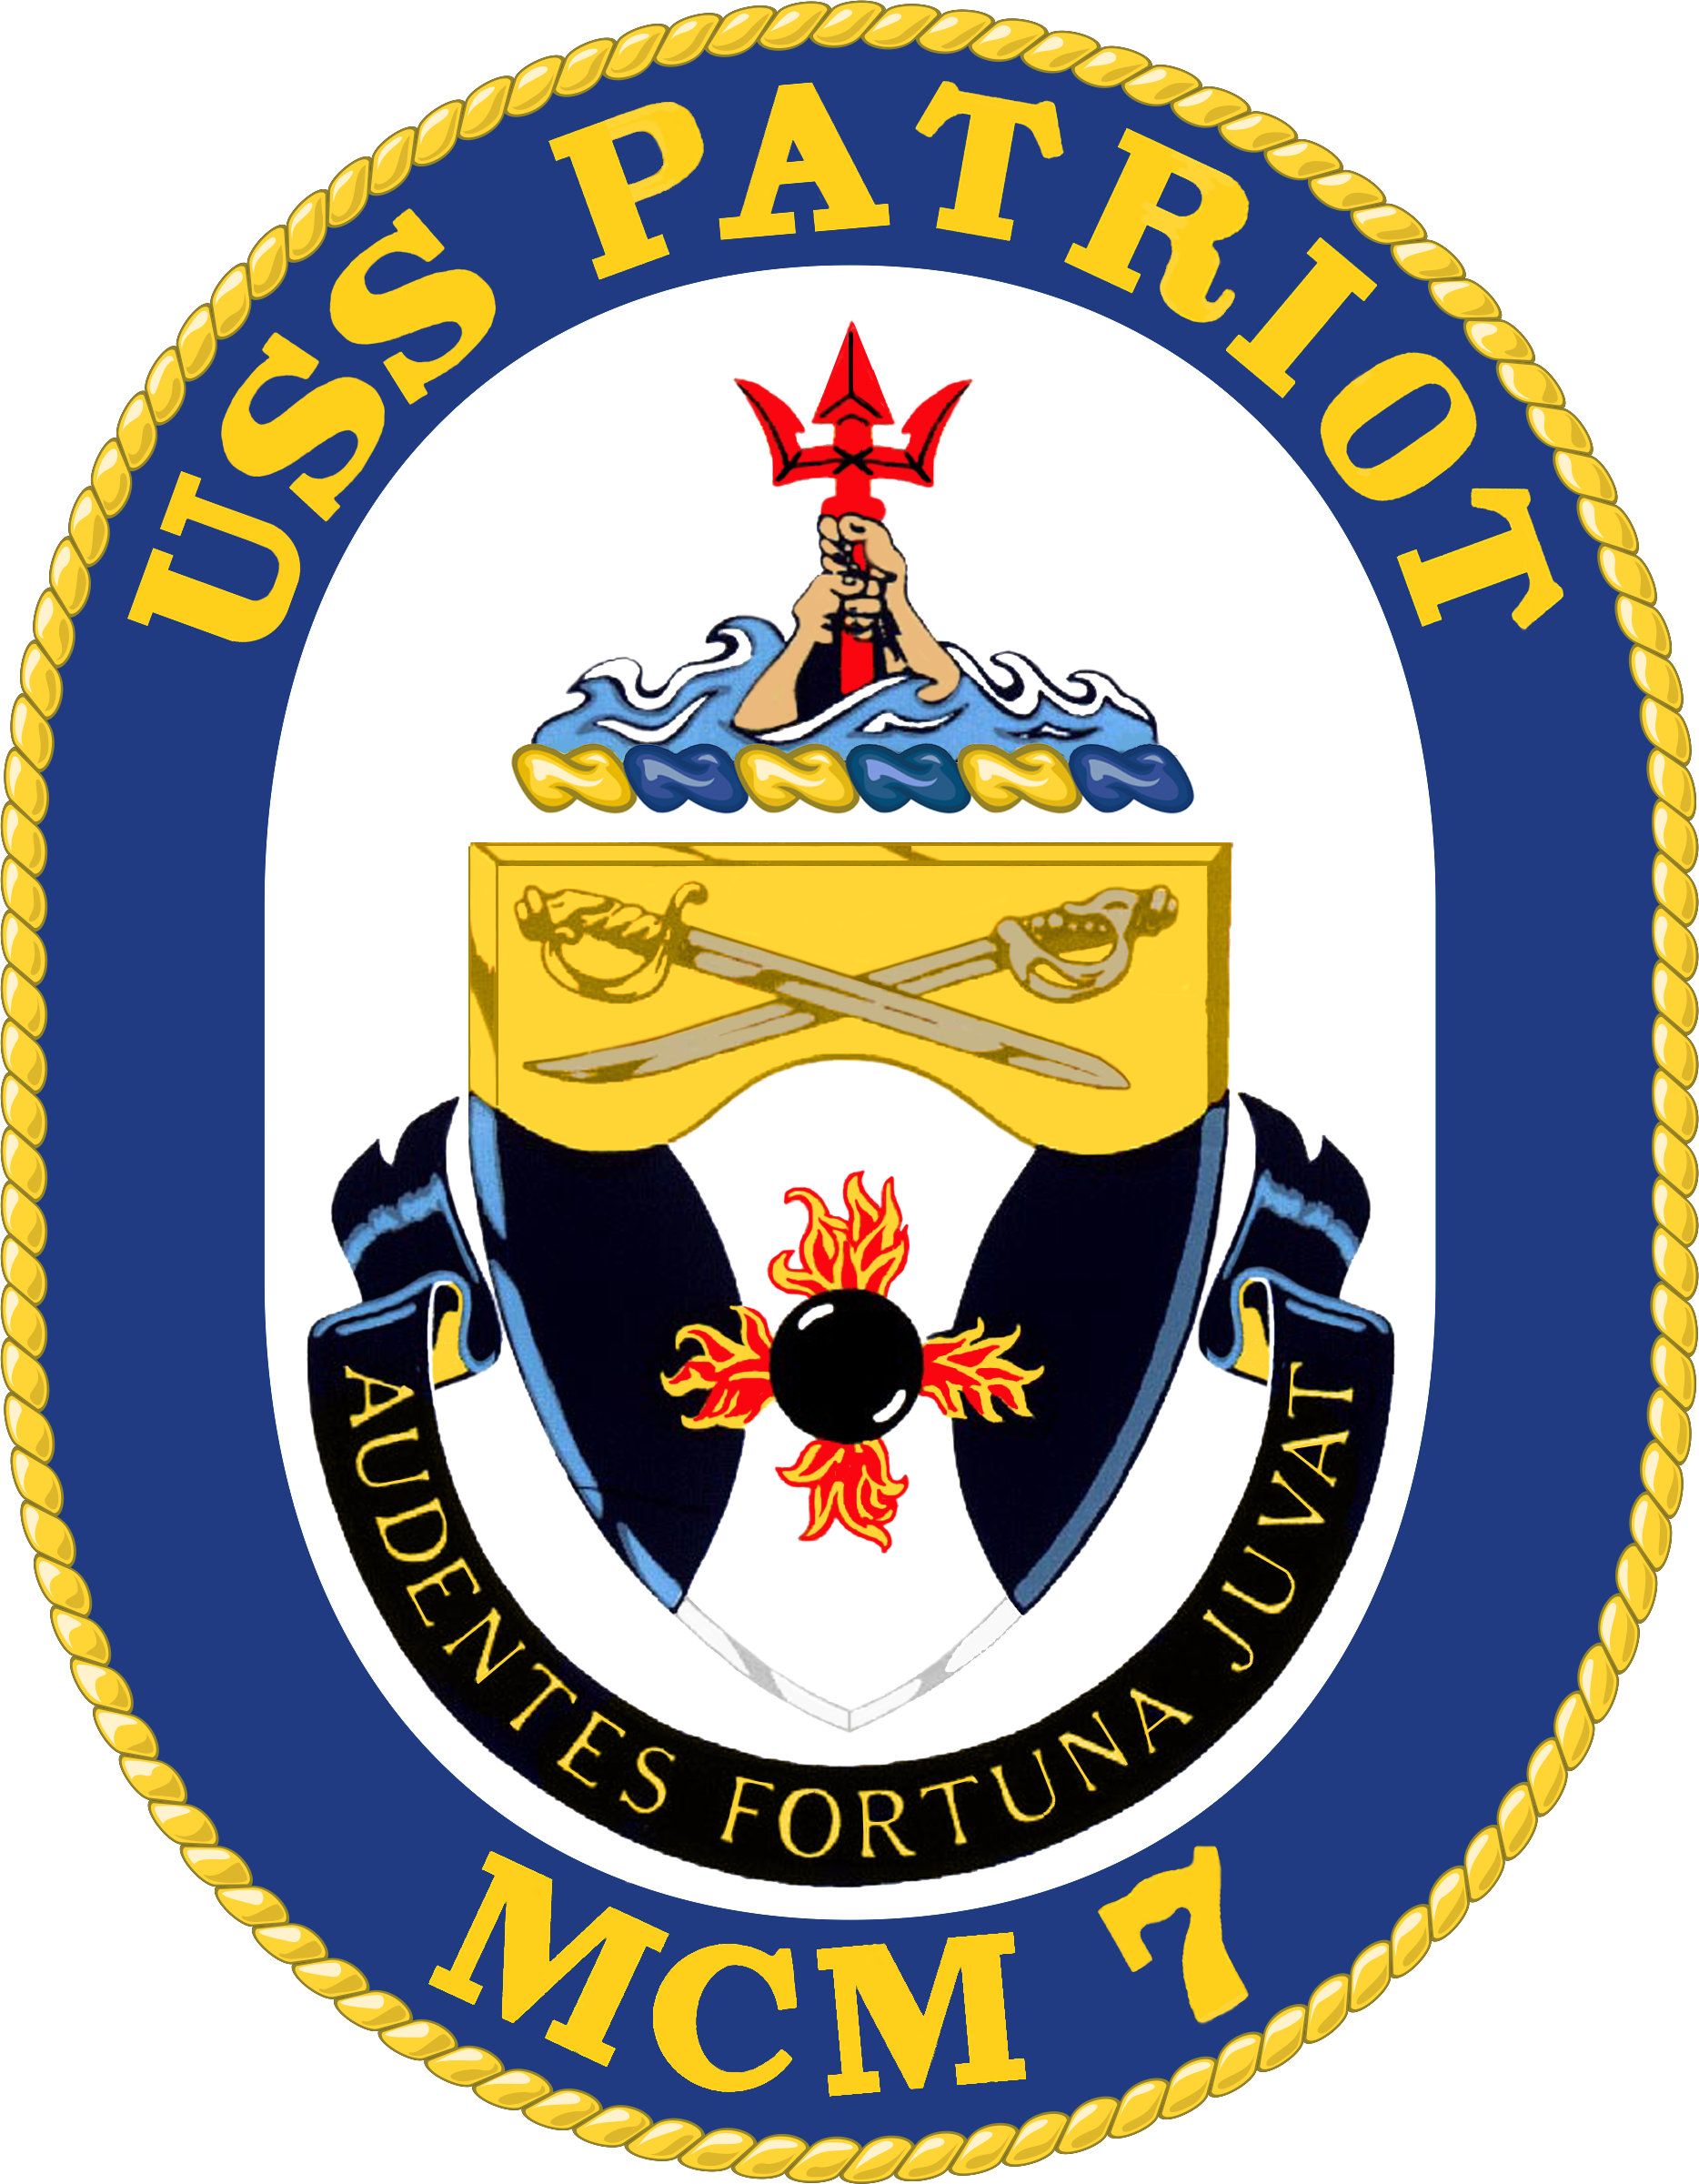 File:USS Patriot MCM-7 Crest.png - Wikimedia Commons